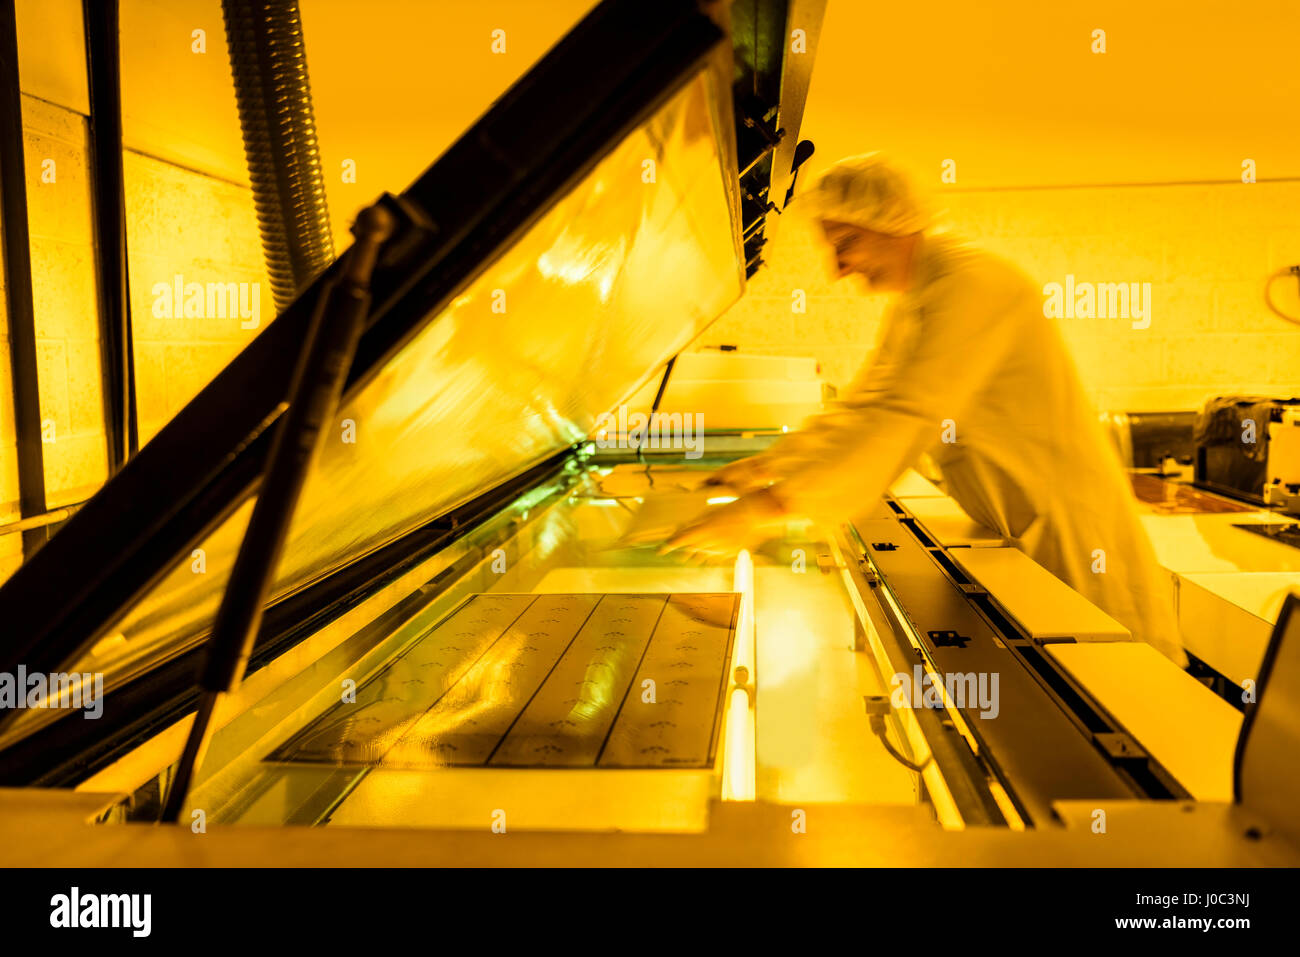 Worker placing negative of circuit board in machine in safe yellow light in electronics factory Stock Photo